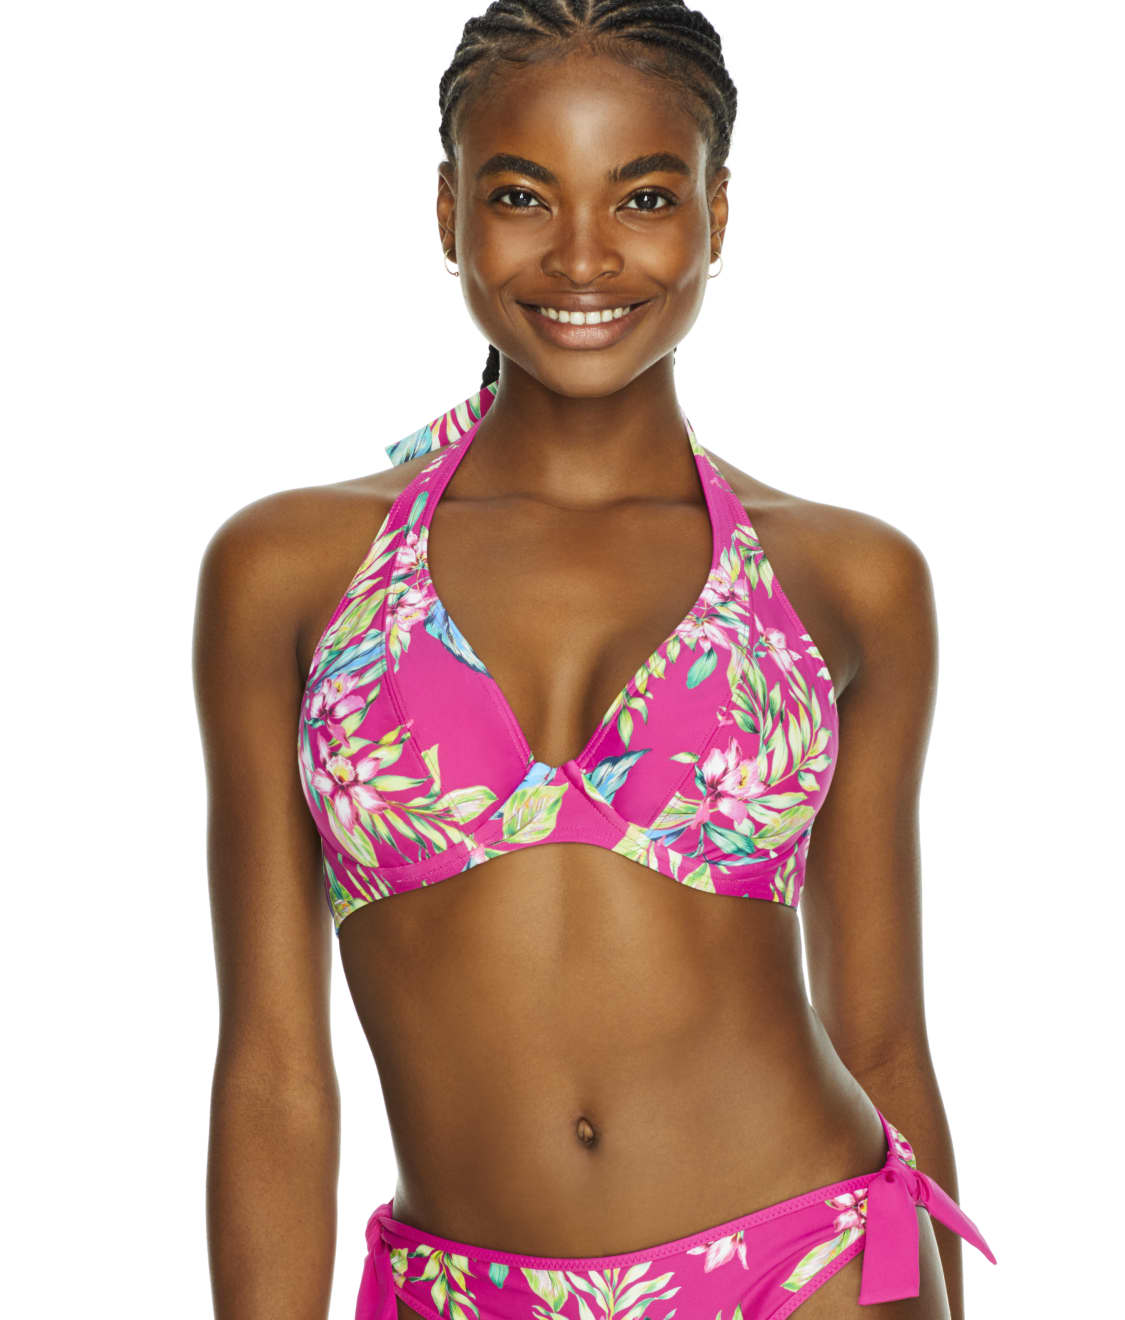 Sunsets: Orchid Oasis Muse Halter Bikini Top 51D-ORCOA